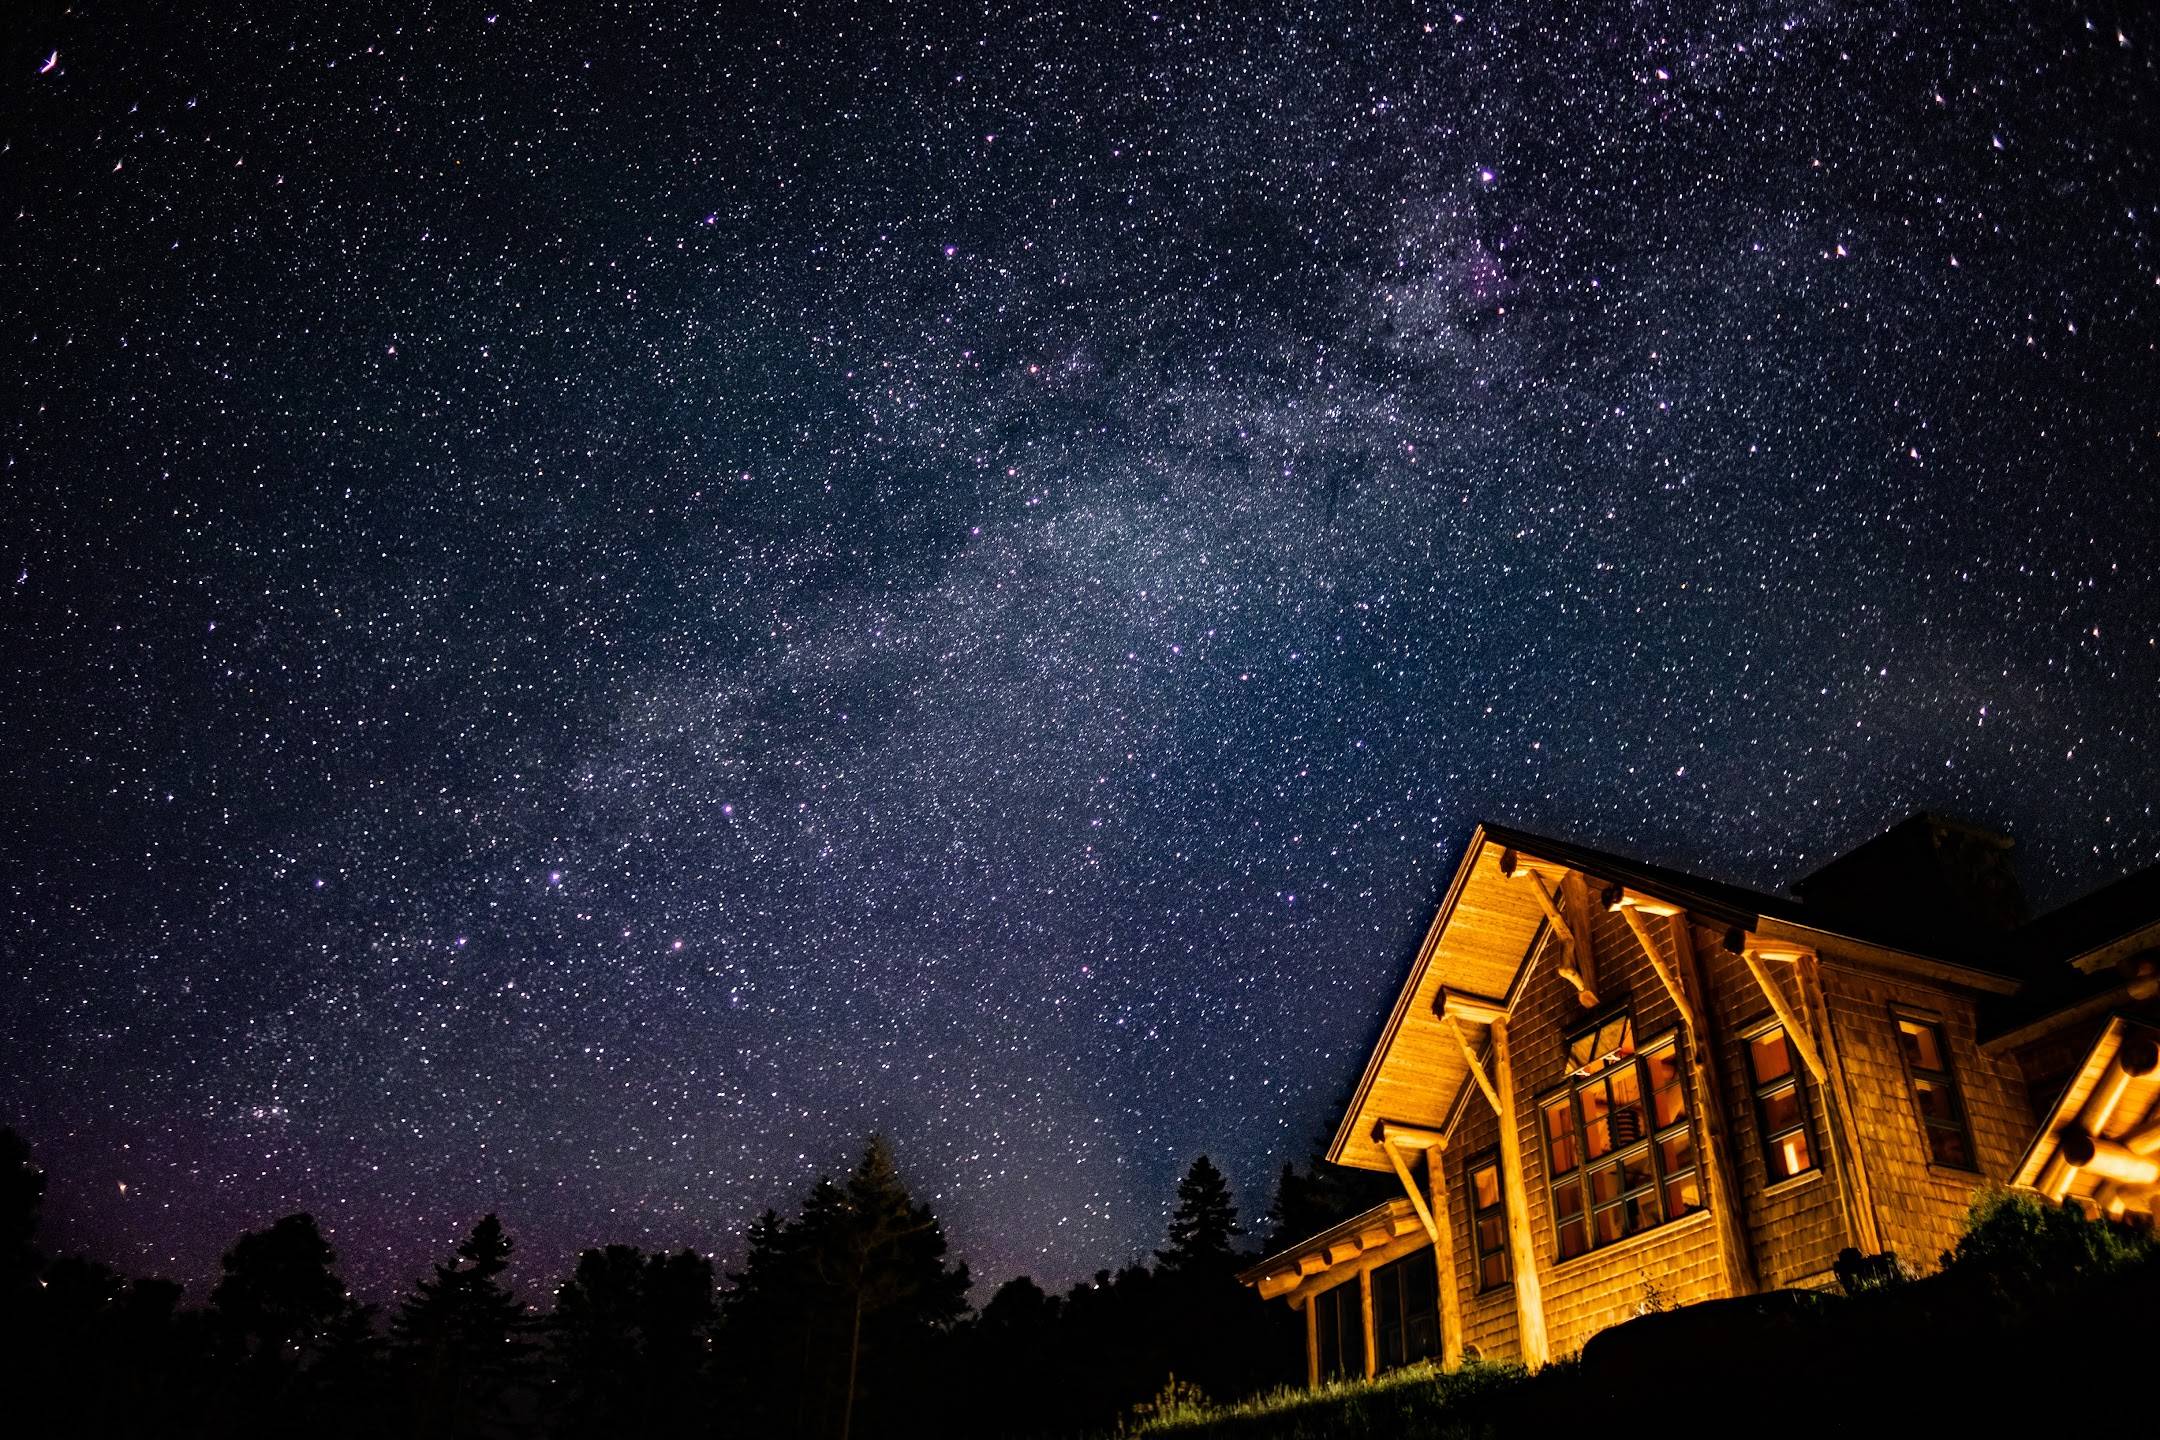 The Lodge glows a warm yellow while the sky is a deep blue and filled with stars.